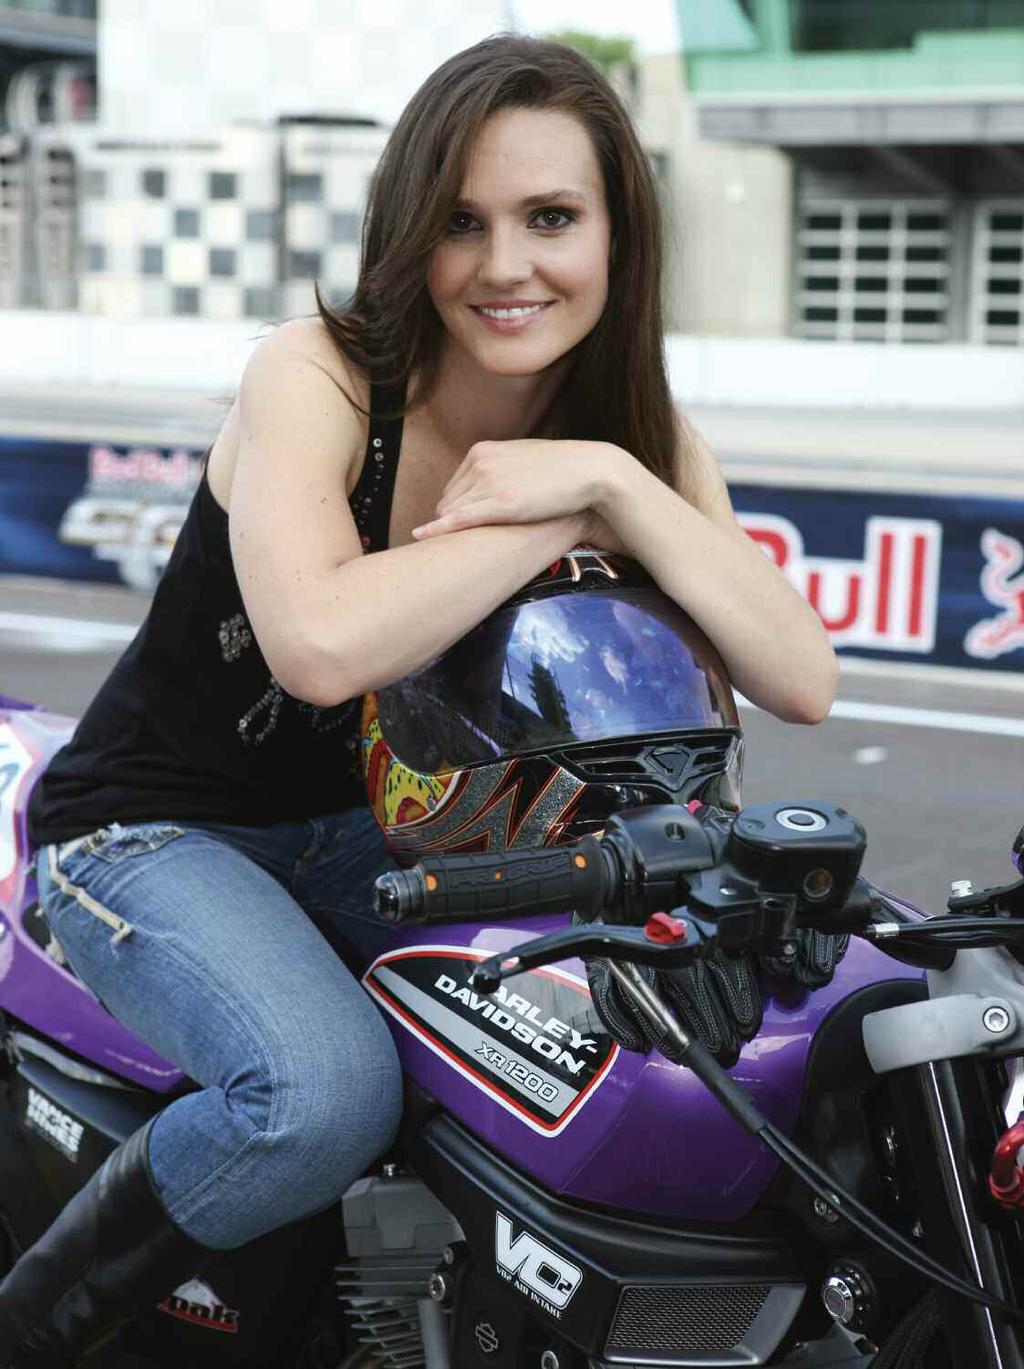 SHELINA MOREDA FIRST WOMAN TO RACE A MOTORCYCLE AT INDY 8 Headed into the 2012 season, Shelina Moreda has had a short but successful professional motorcycle road racing career, distinguished by a